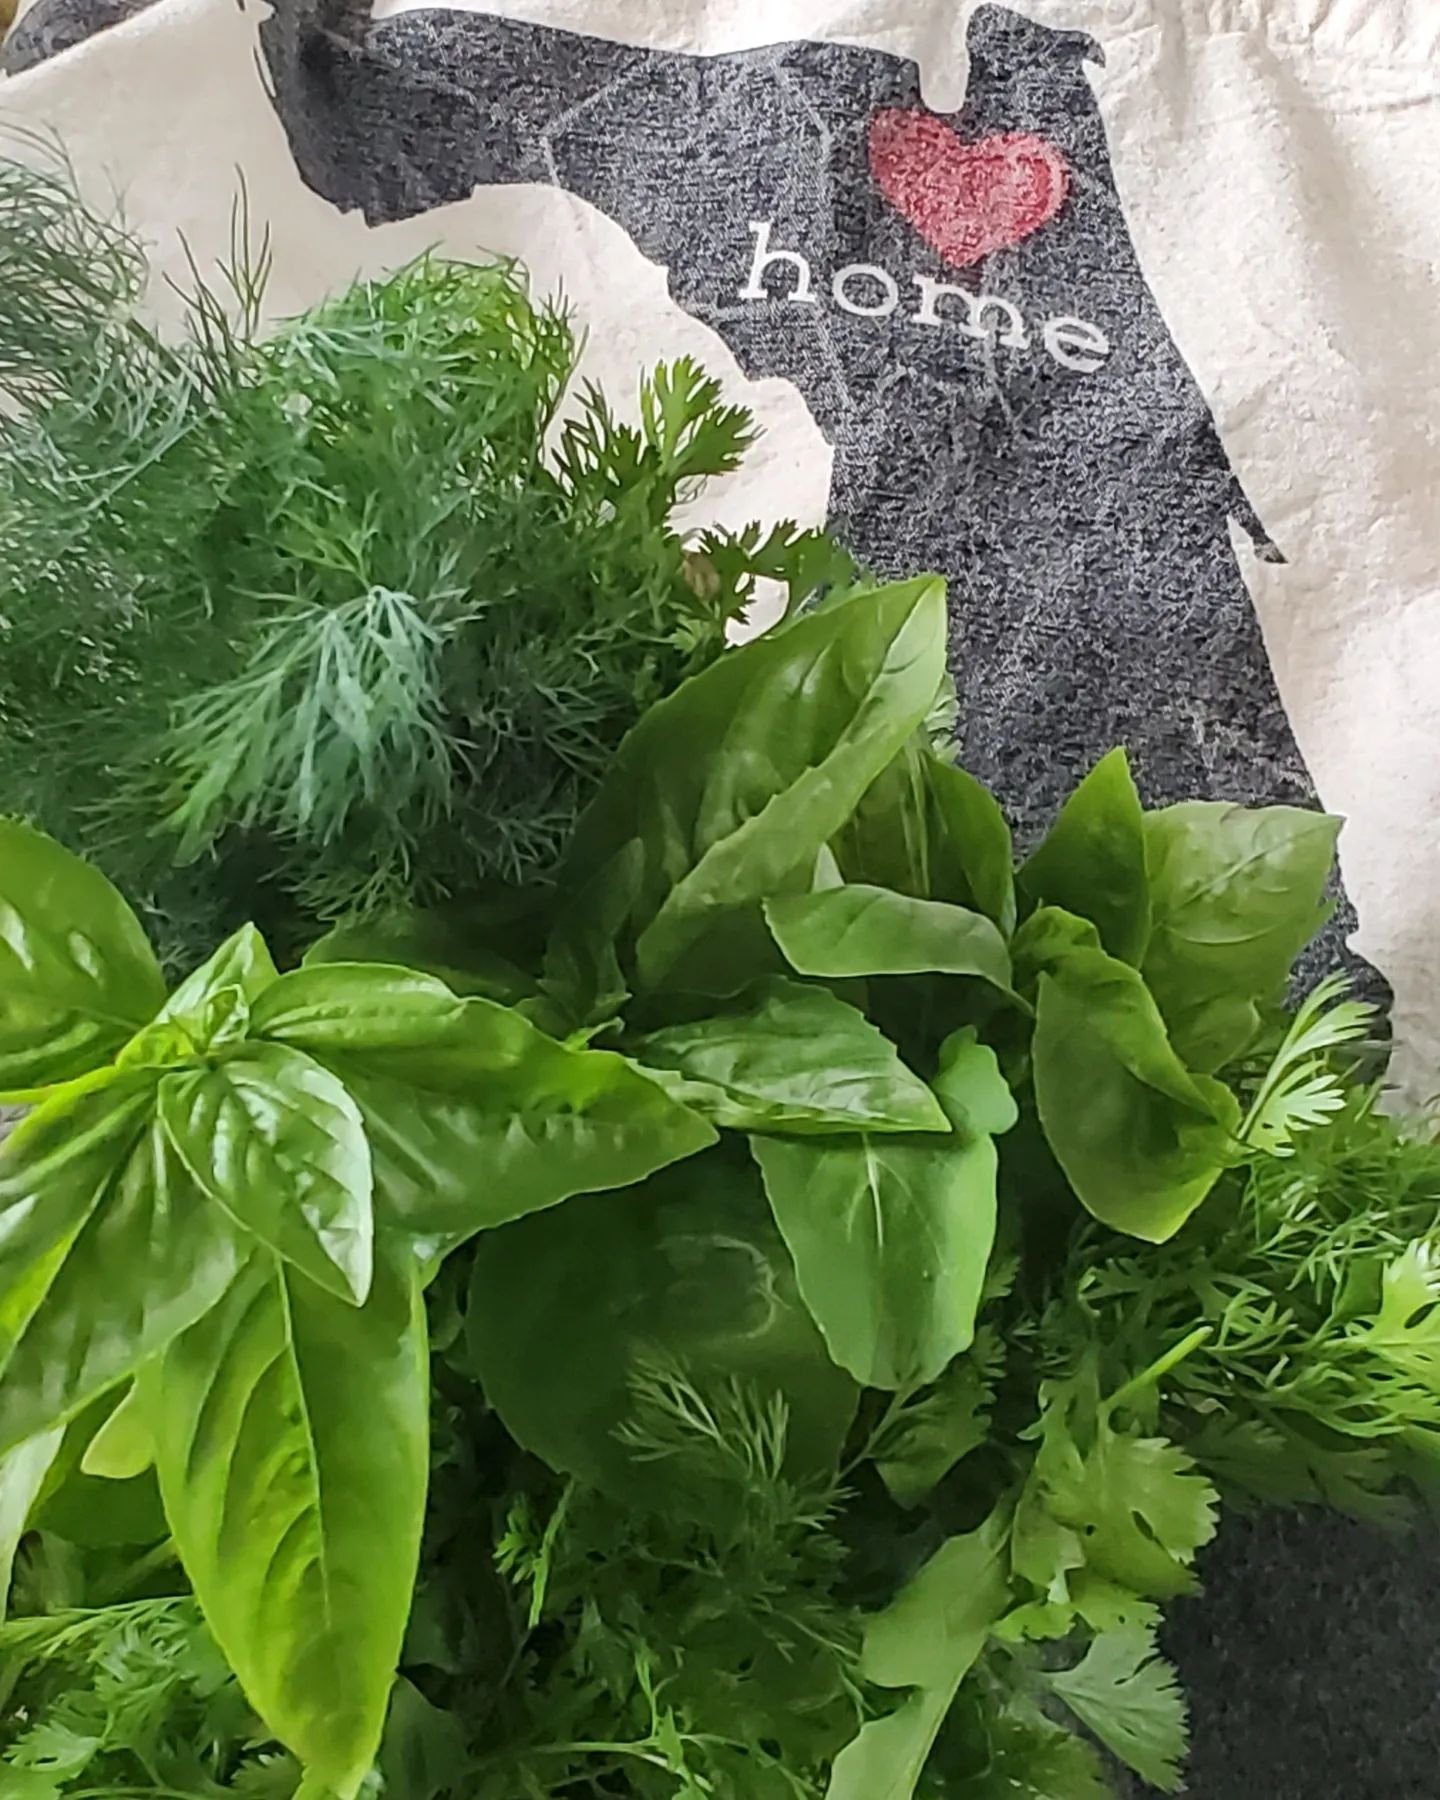 Some people get flowers, my friends give me bouquets of fresh herbs 😍

Nothing makes a meal better than loved on herbs from @boldcitylife! A walk through her garden is an instant mood lift and my grandbabies love seeing her chickens and ducks ❤️